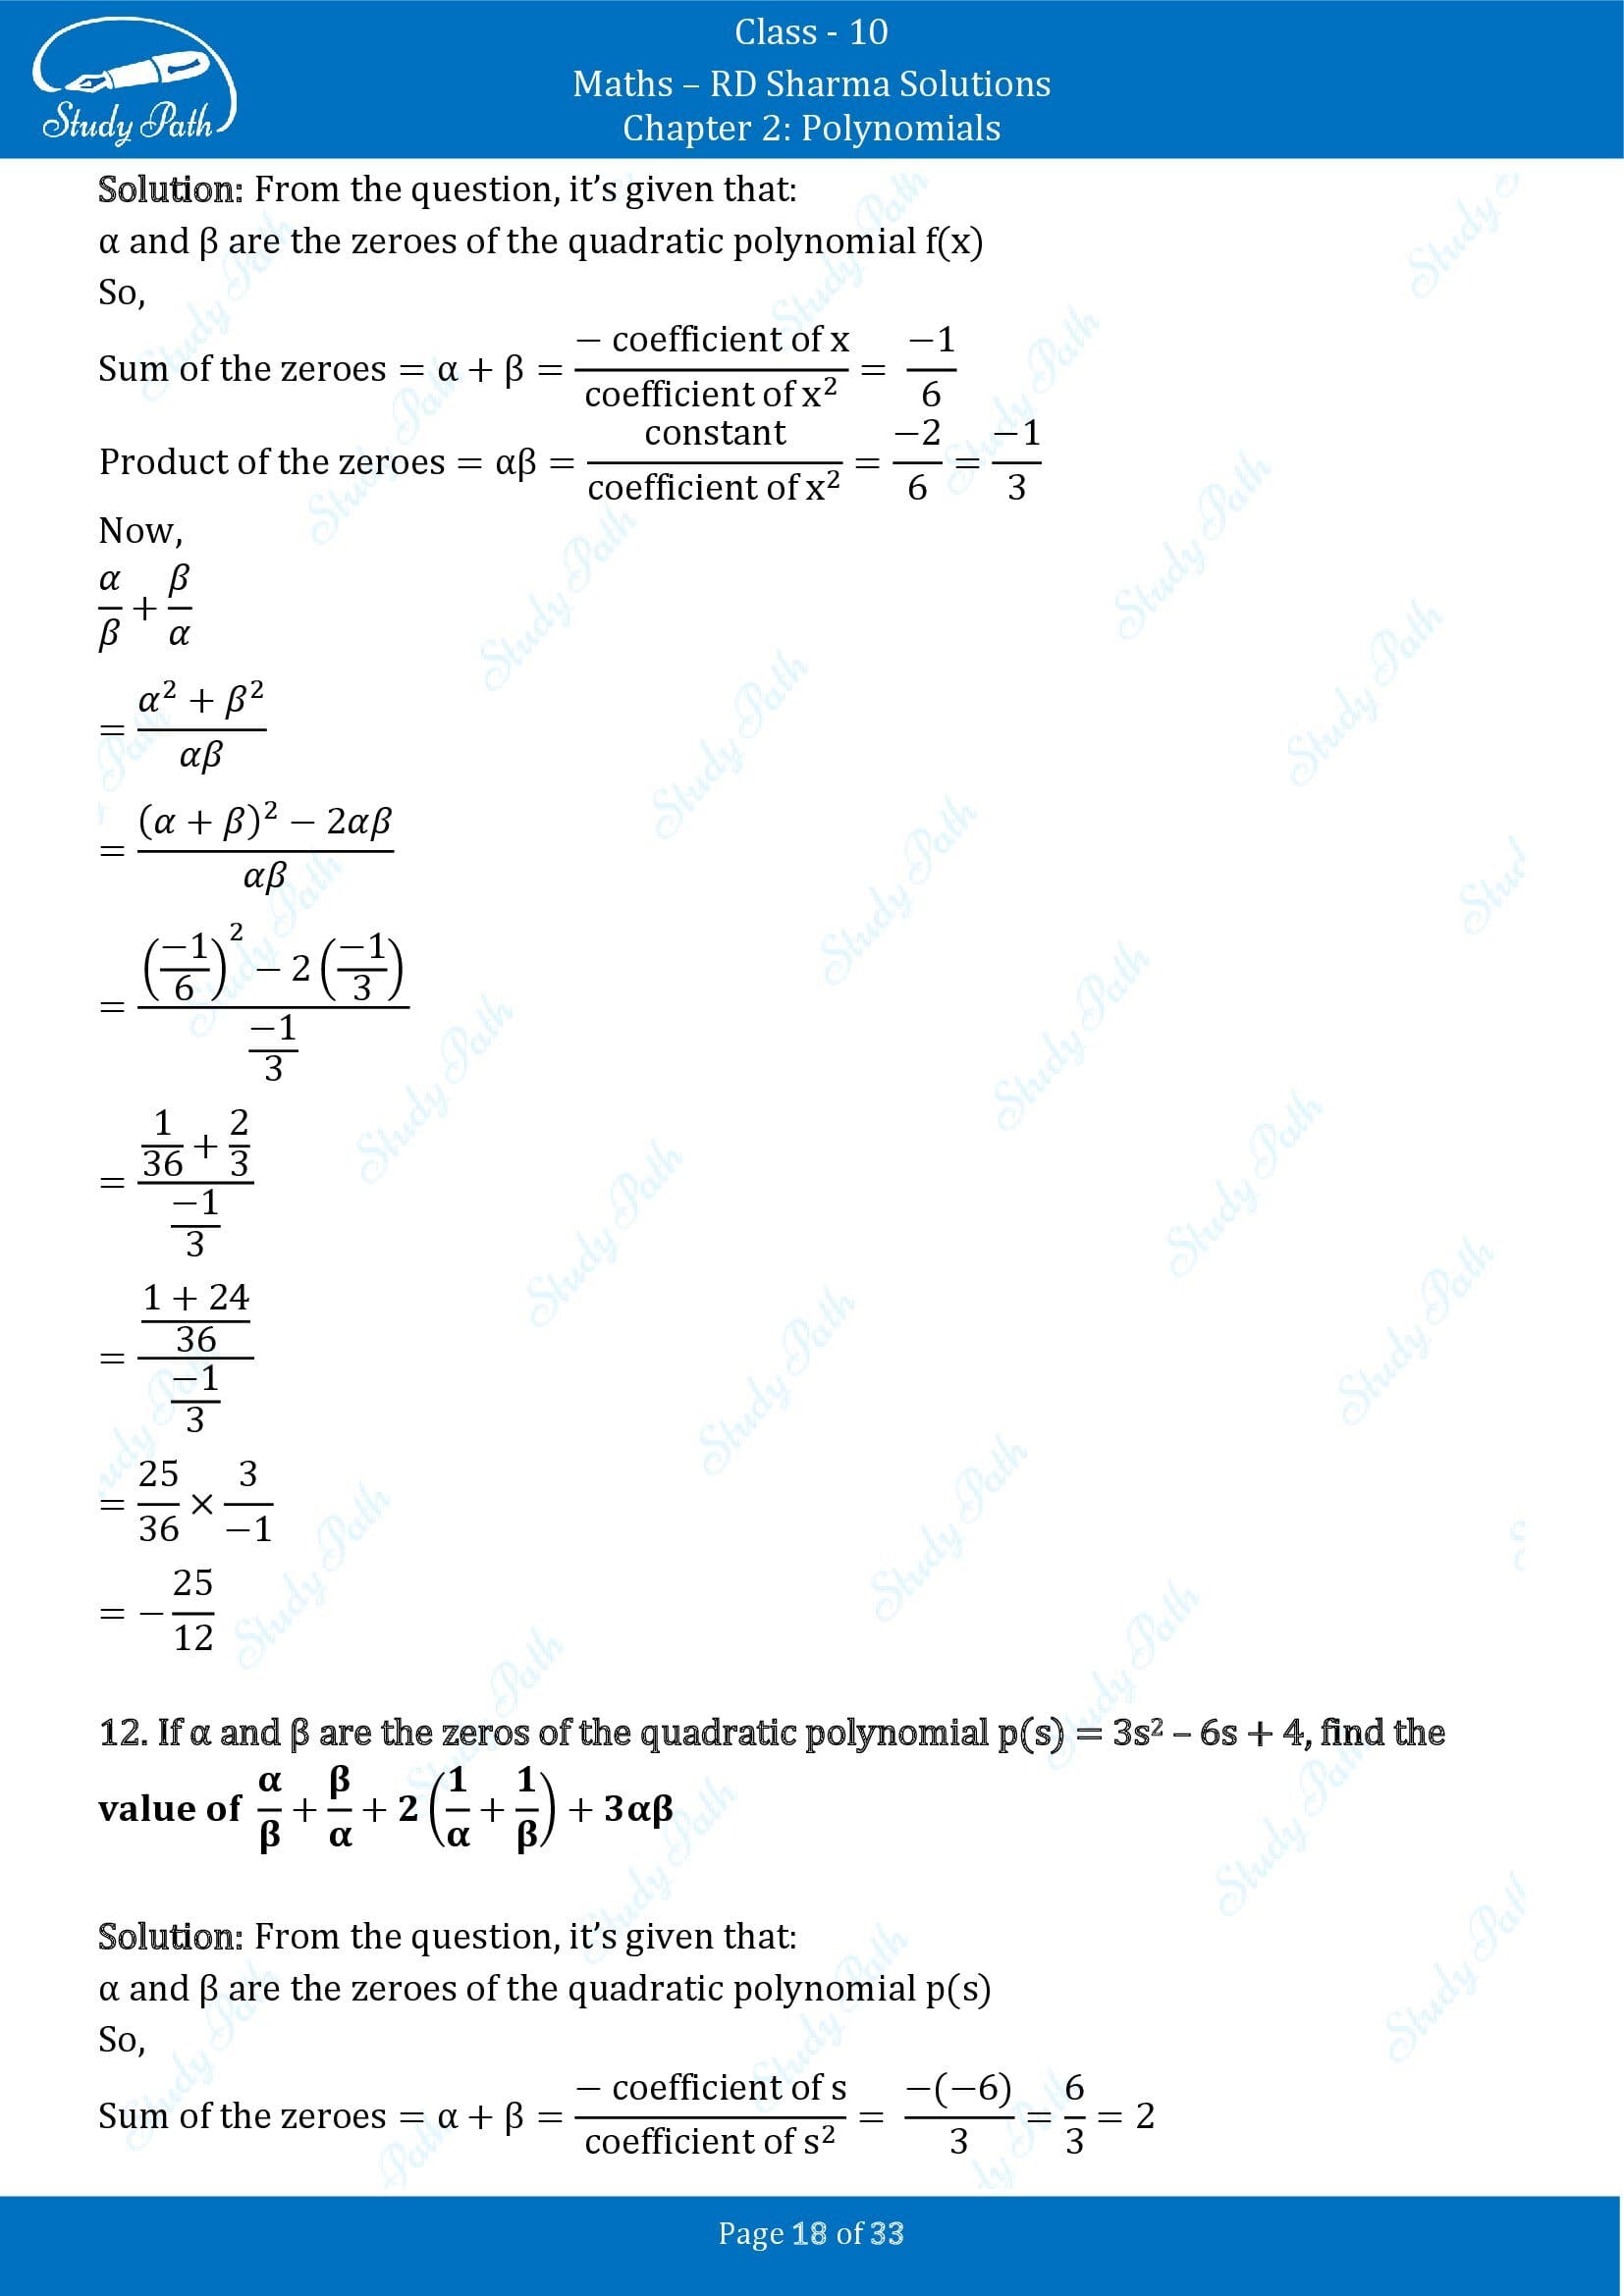 RD Sharma Solutions Class 10 Chapter 2 Polynomials Exercise 2.1 00018